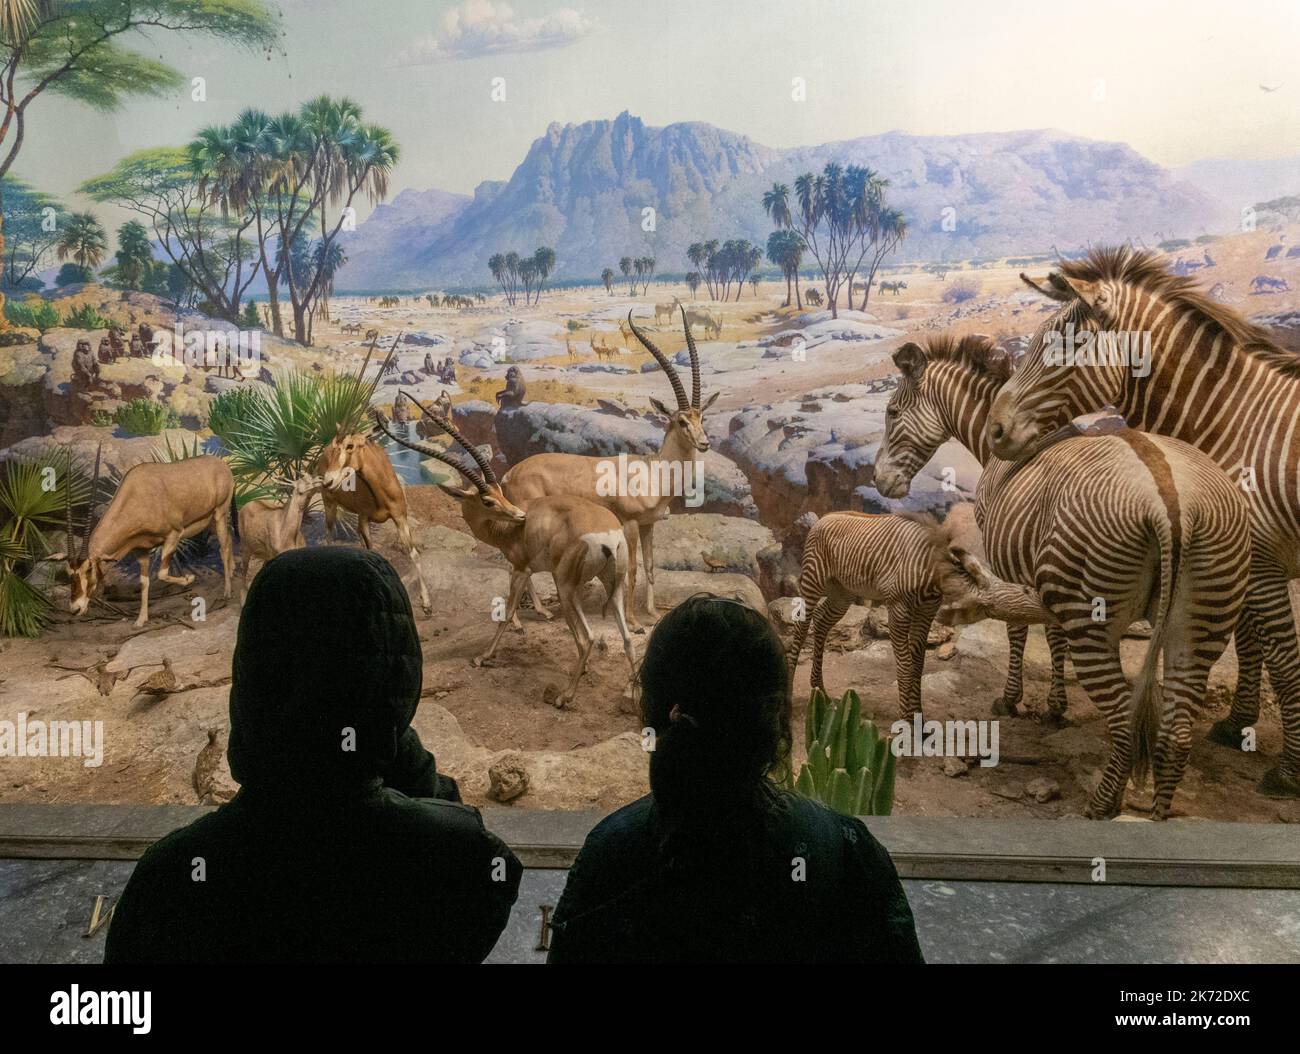 Kinder beobachten Diorama in der Akeley Hall of African Mammals, American Museum of Natural History, New York City, USA Stockfoto